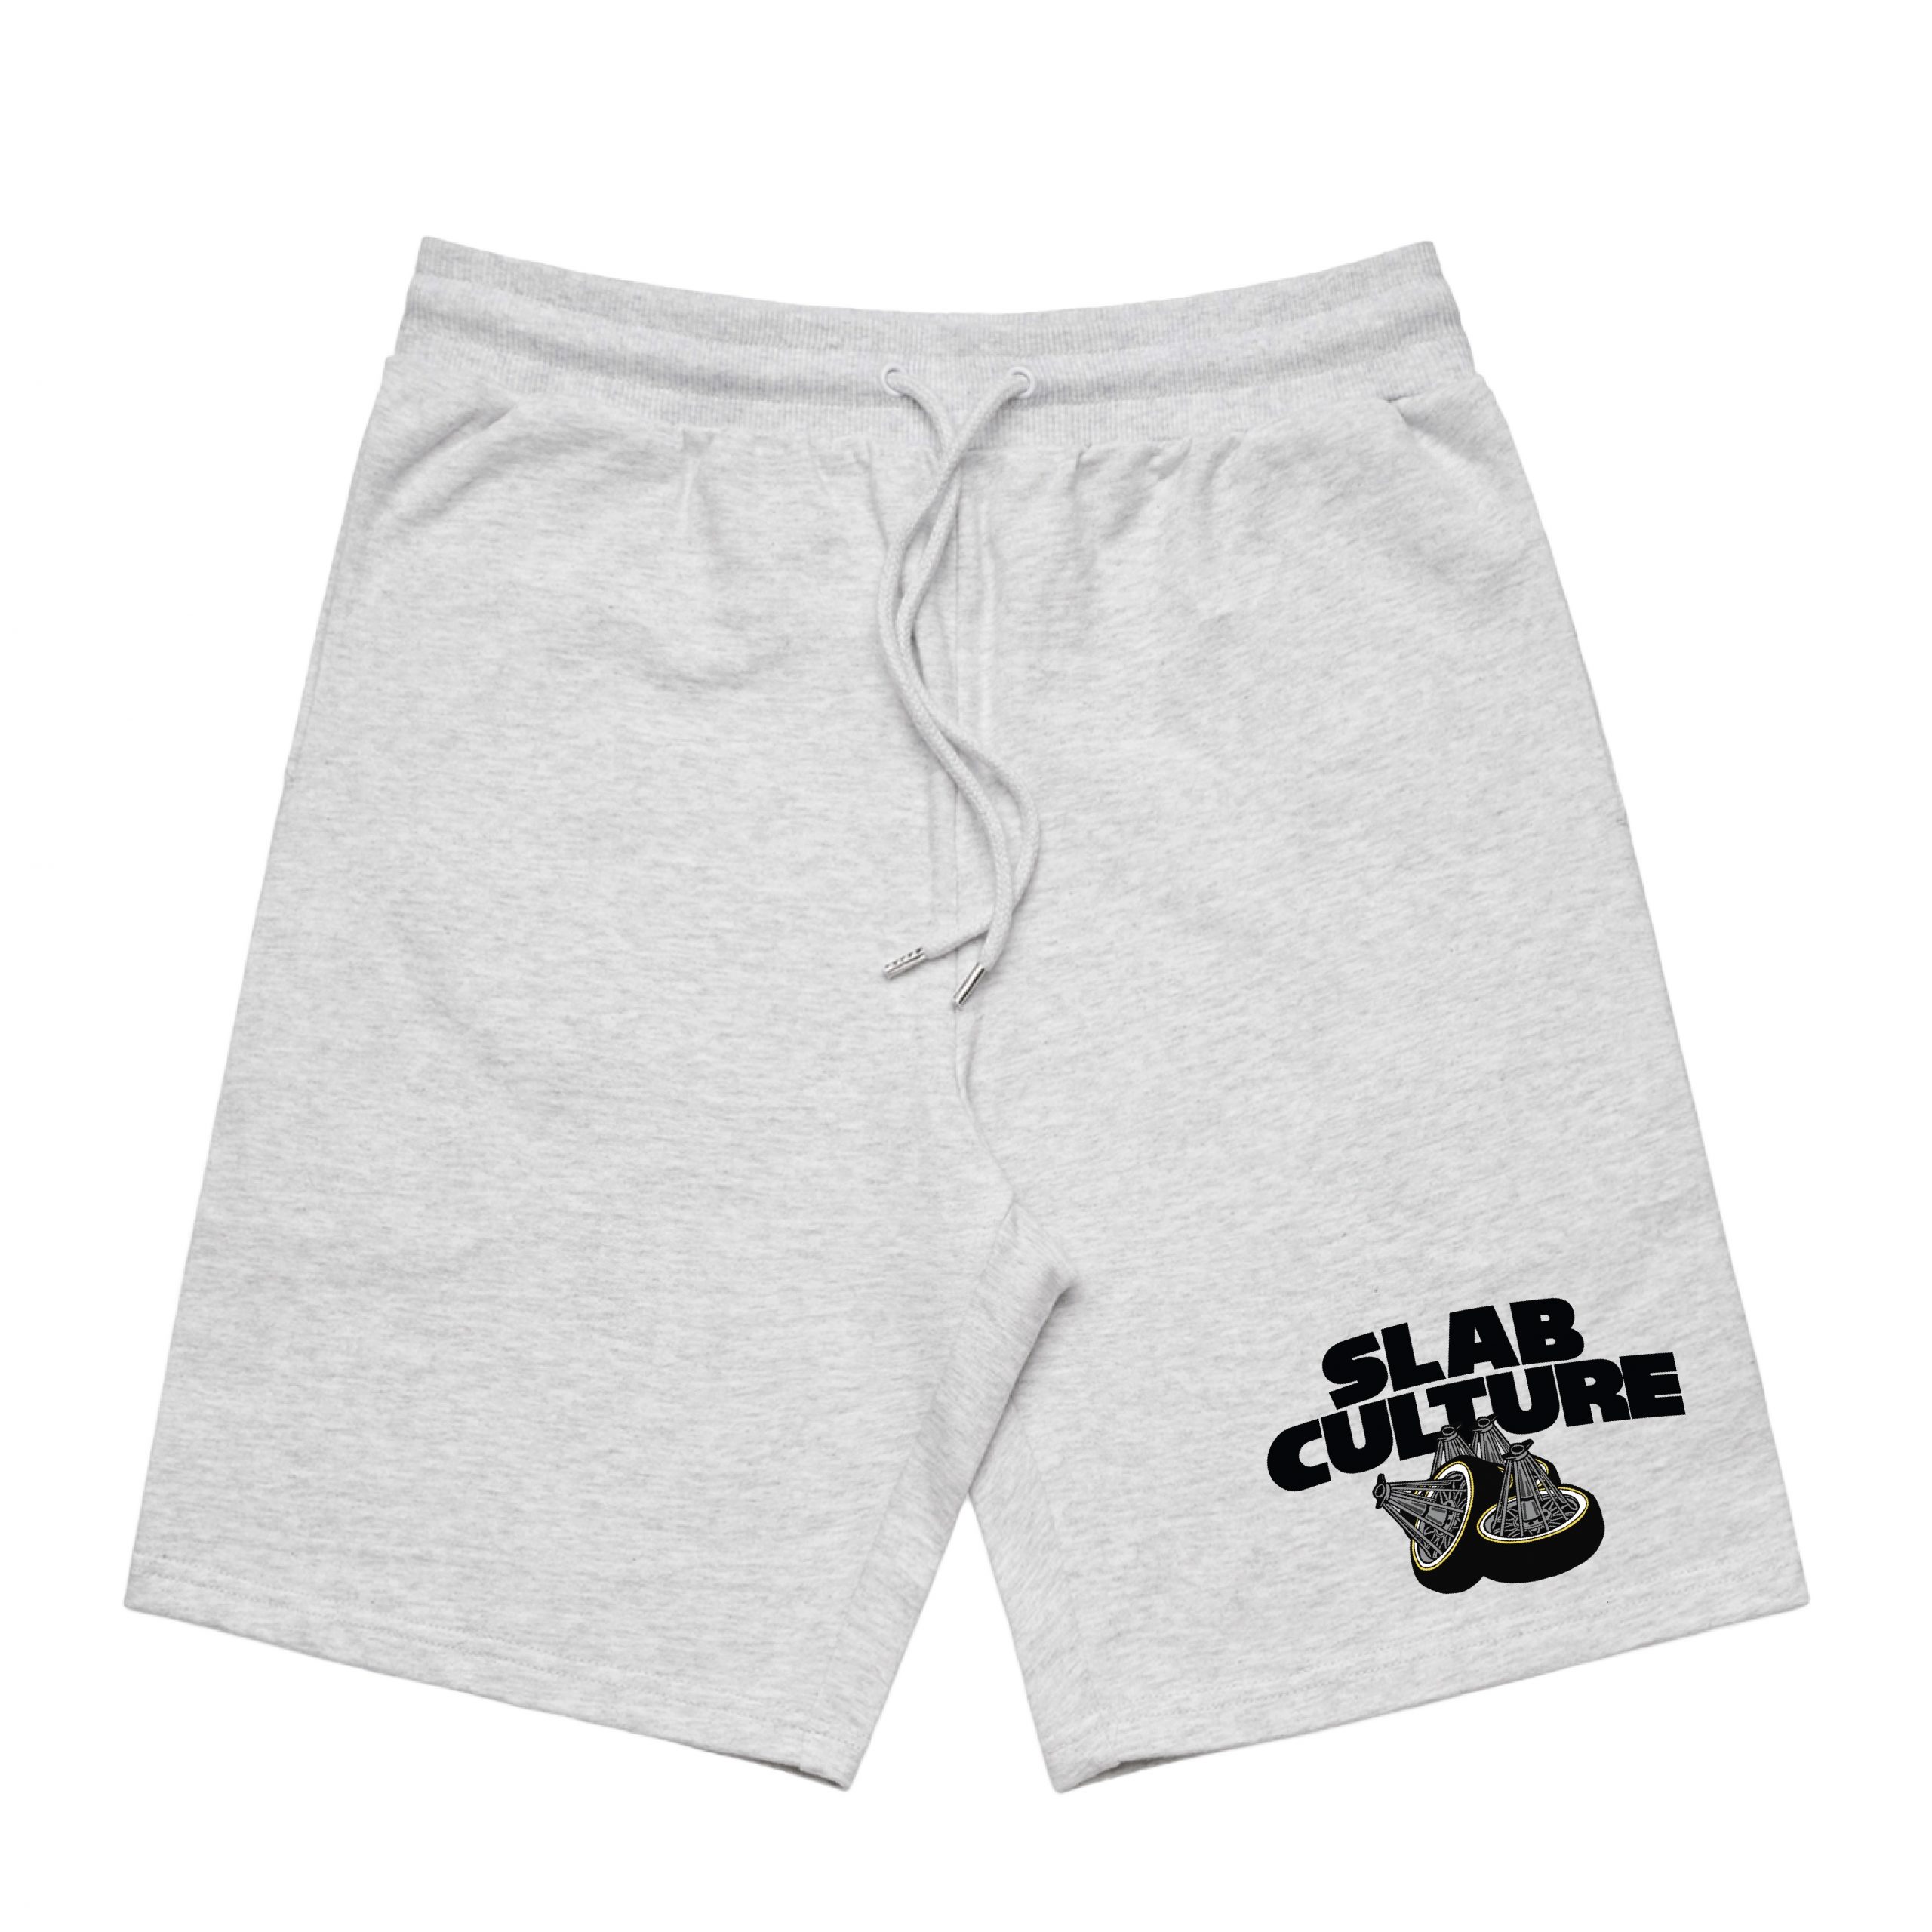 4x4 Collection Shorts - Slab Culture